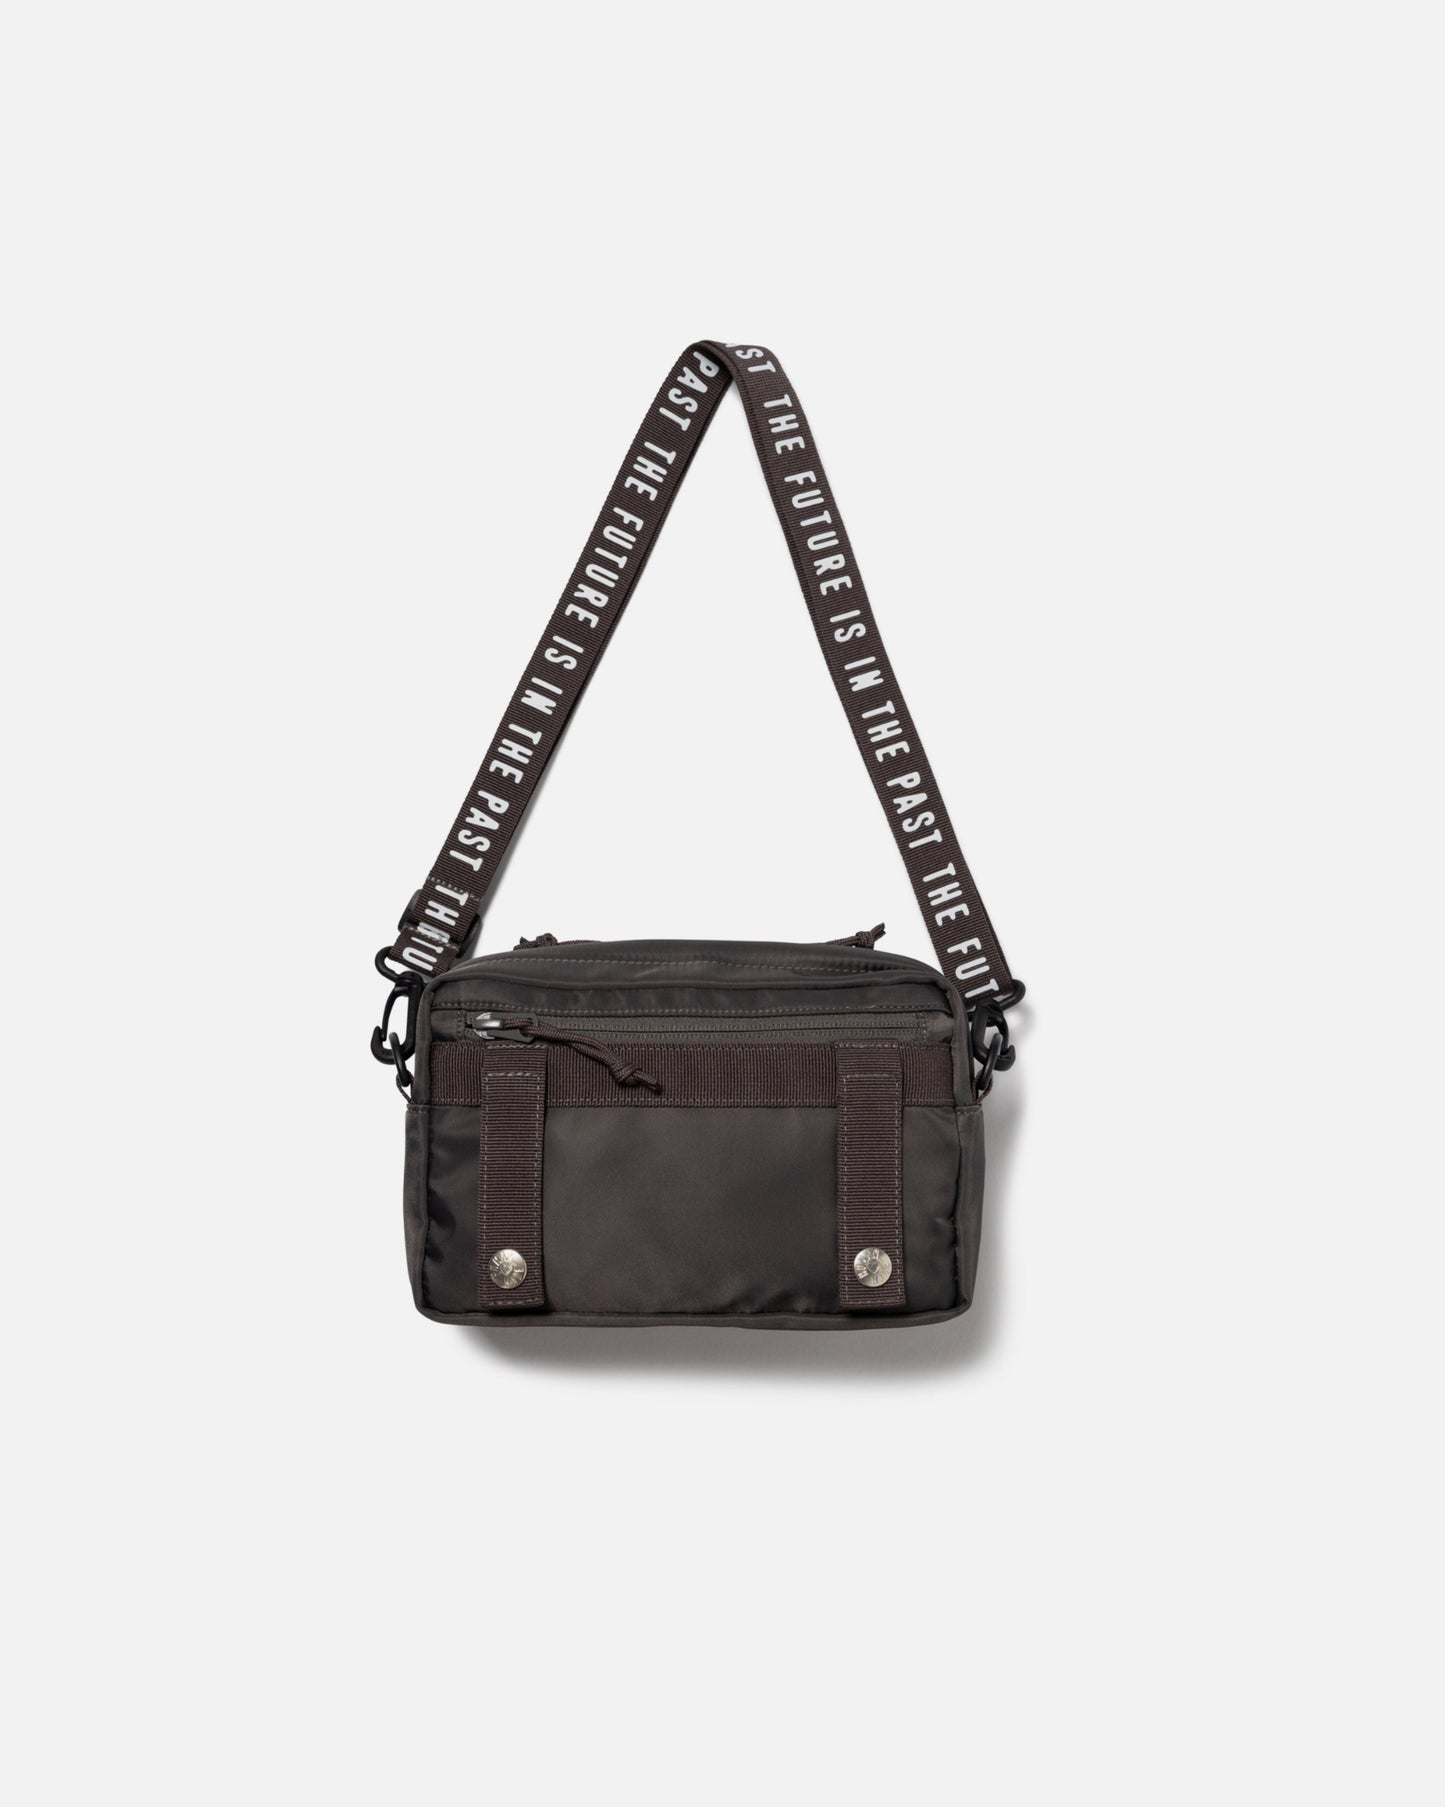 MILITARY POUCH SMALL (GRAY)